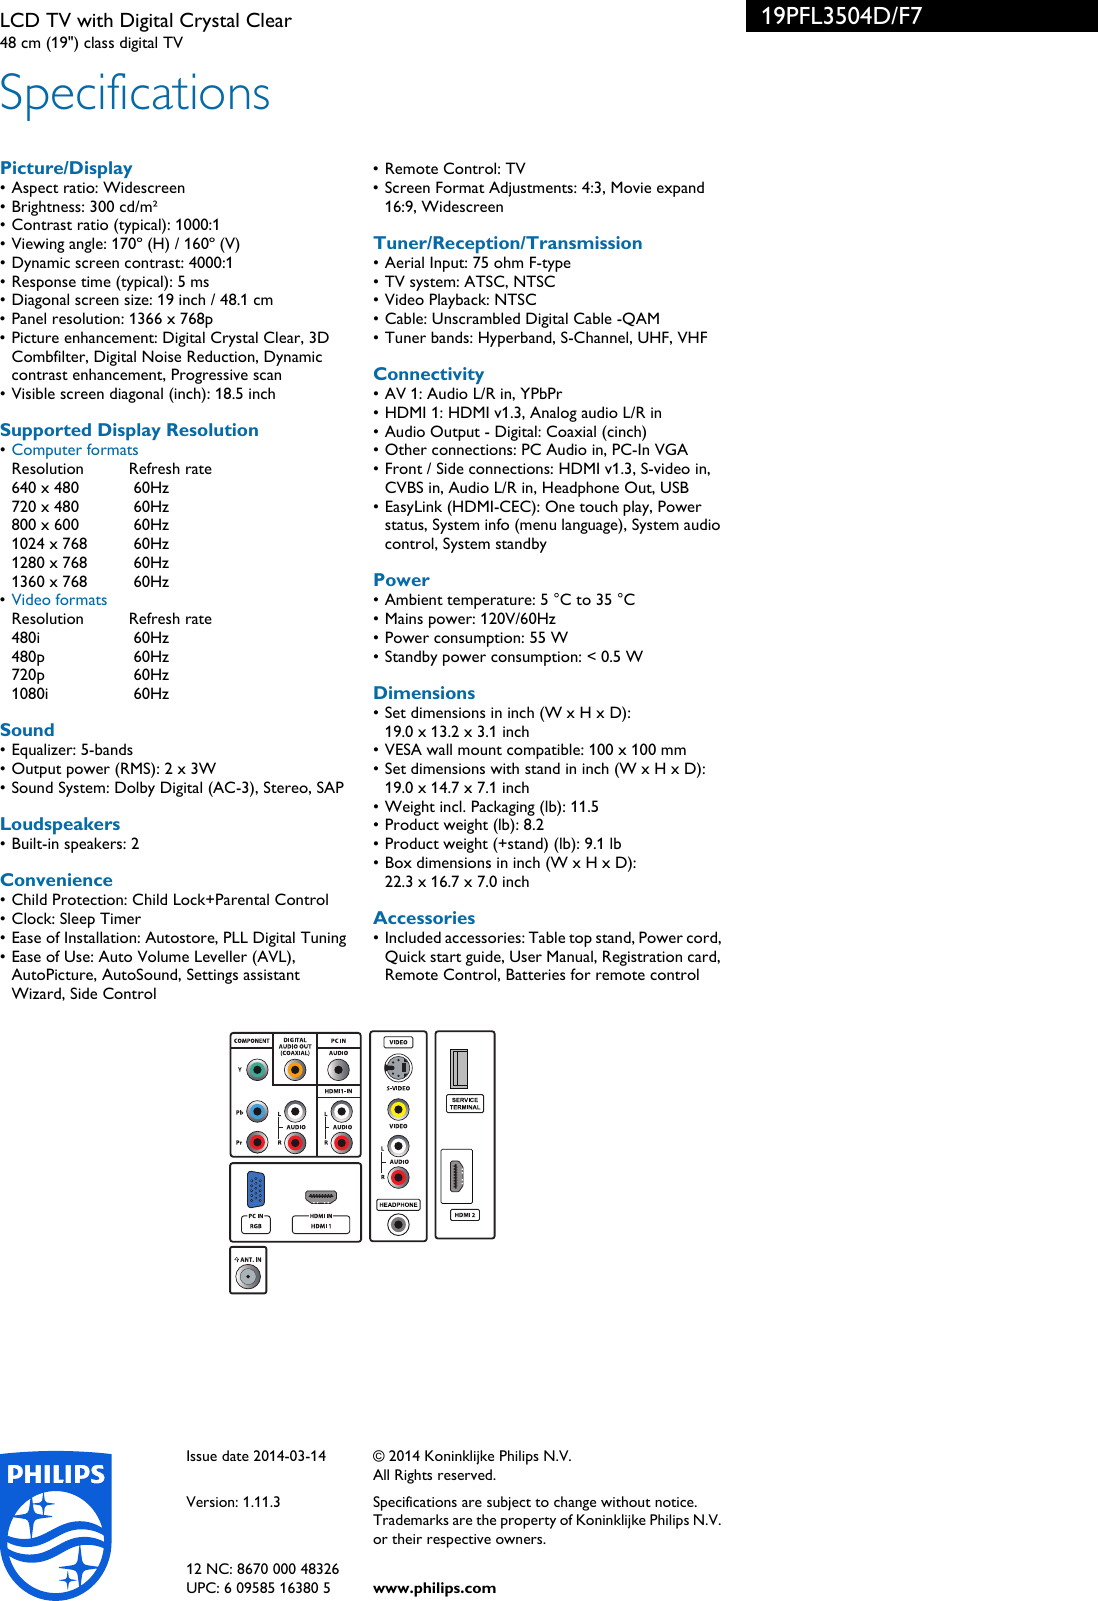 Page 3 of 3 - Philips 19PFL3504D/F7 LCD TV With Digital Crystal Clear User Manual Leaflet 19pfl3504d F7 Pss Aenus